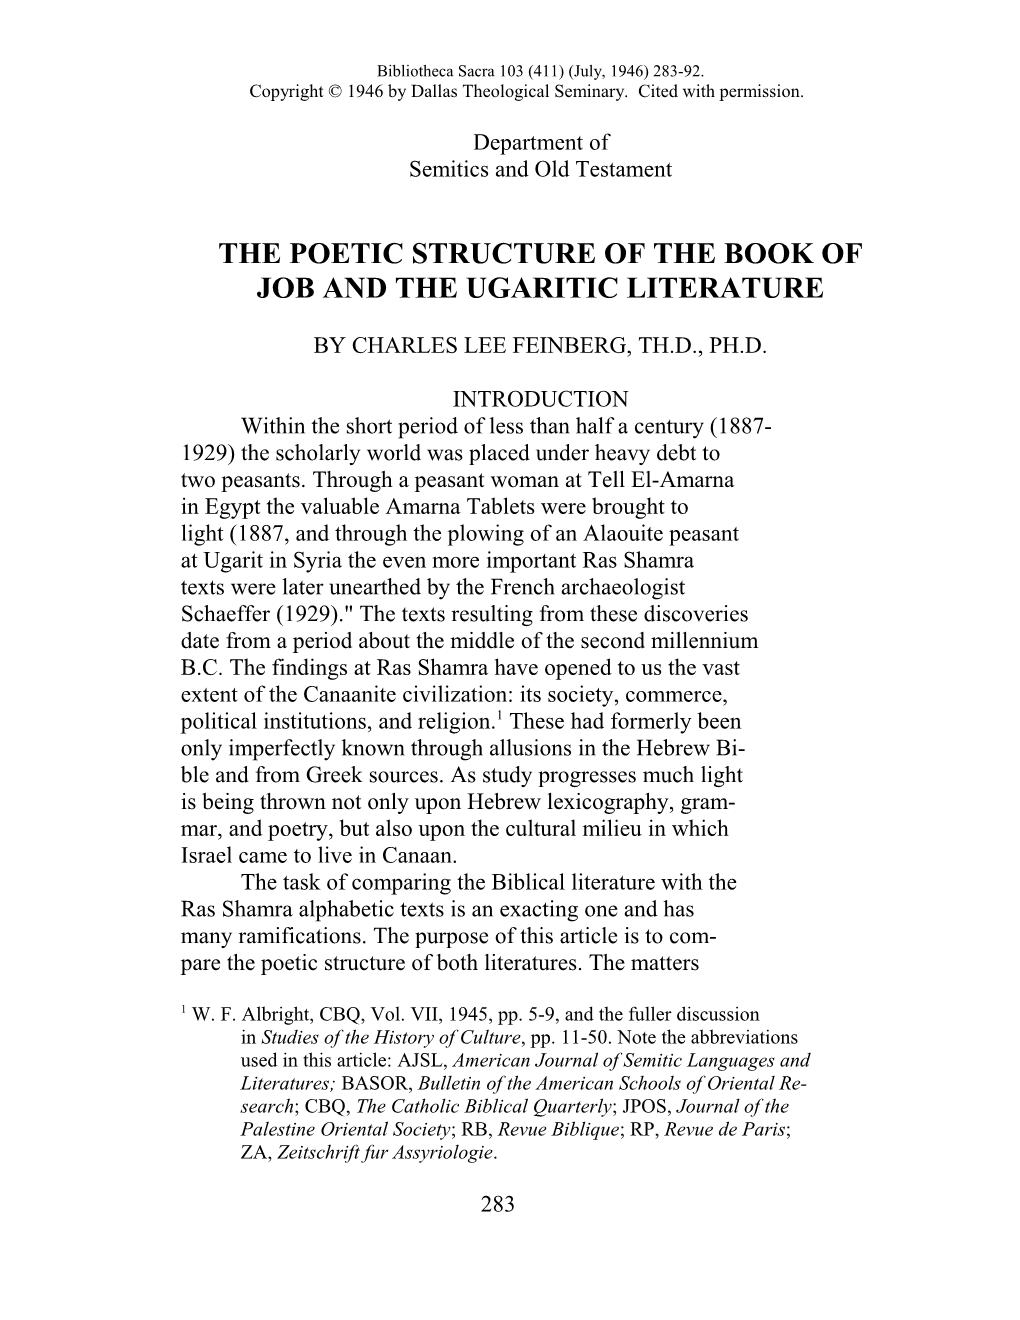 The Poetic Structure of the Book Of